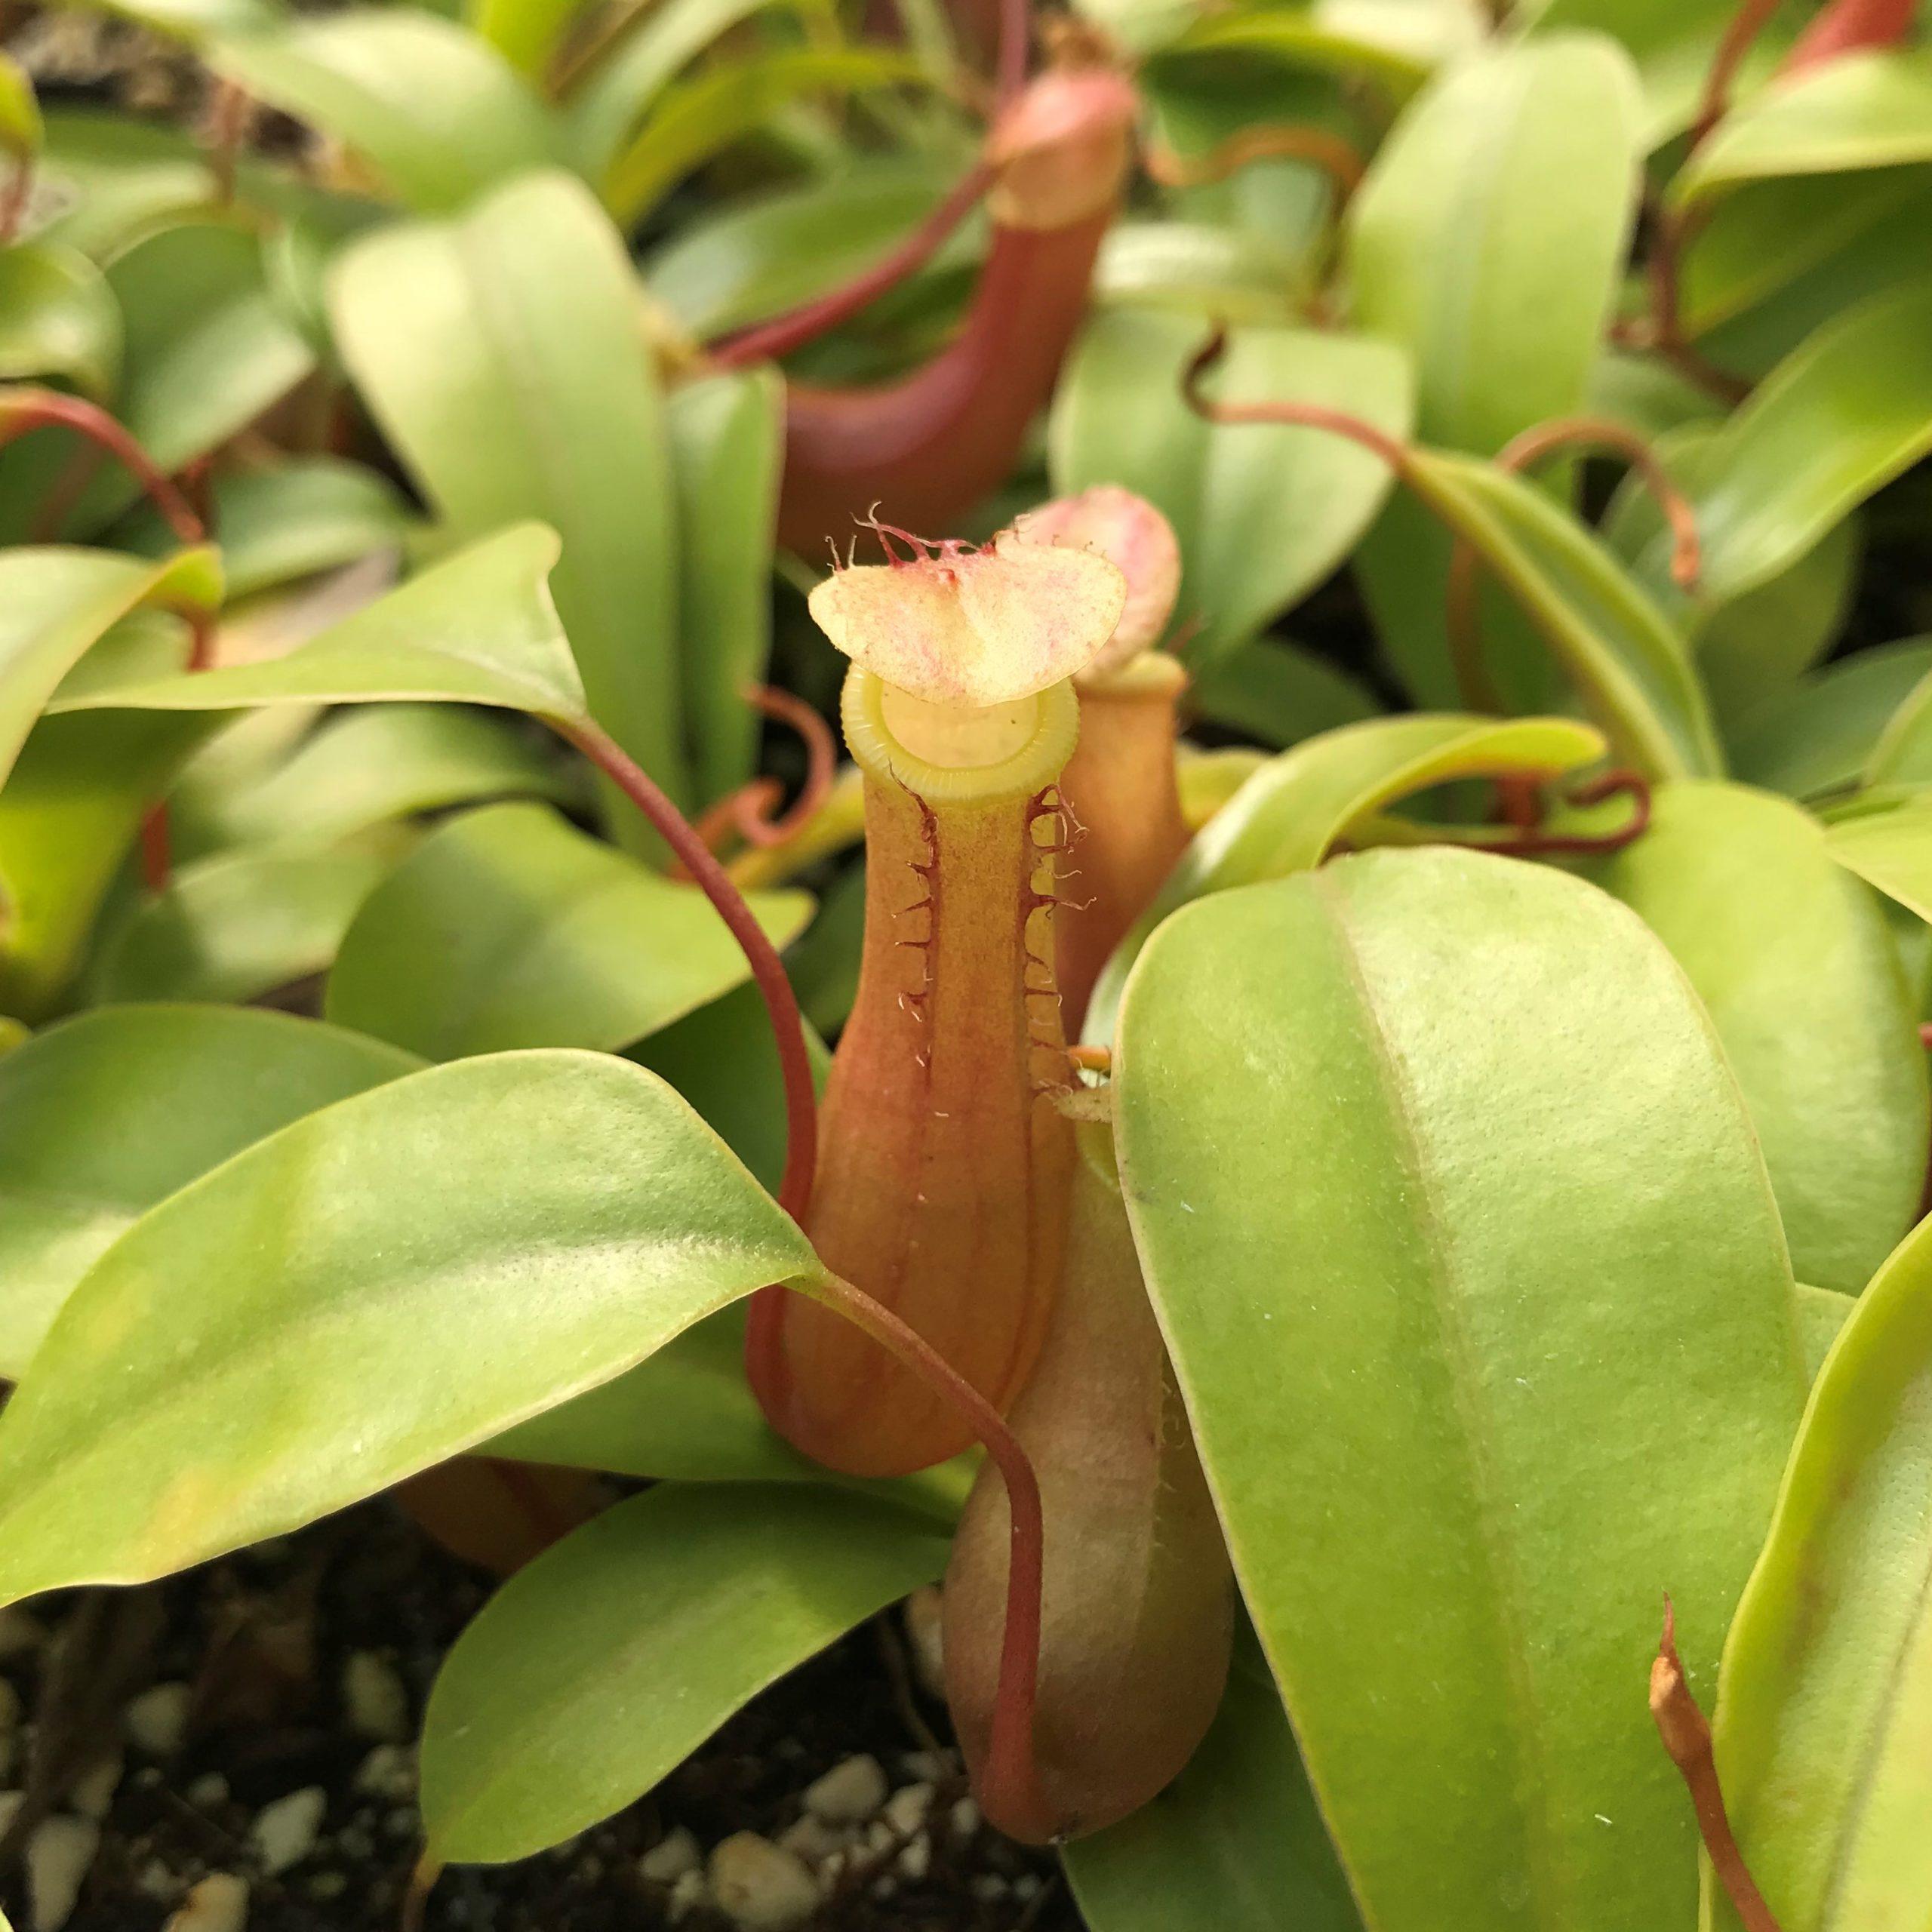 Nepenthes-alata-Pitcher-Plant-March-scaled.jpg